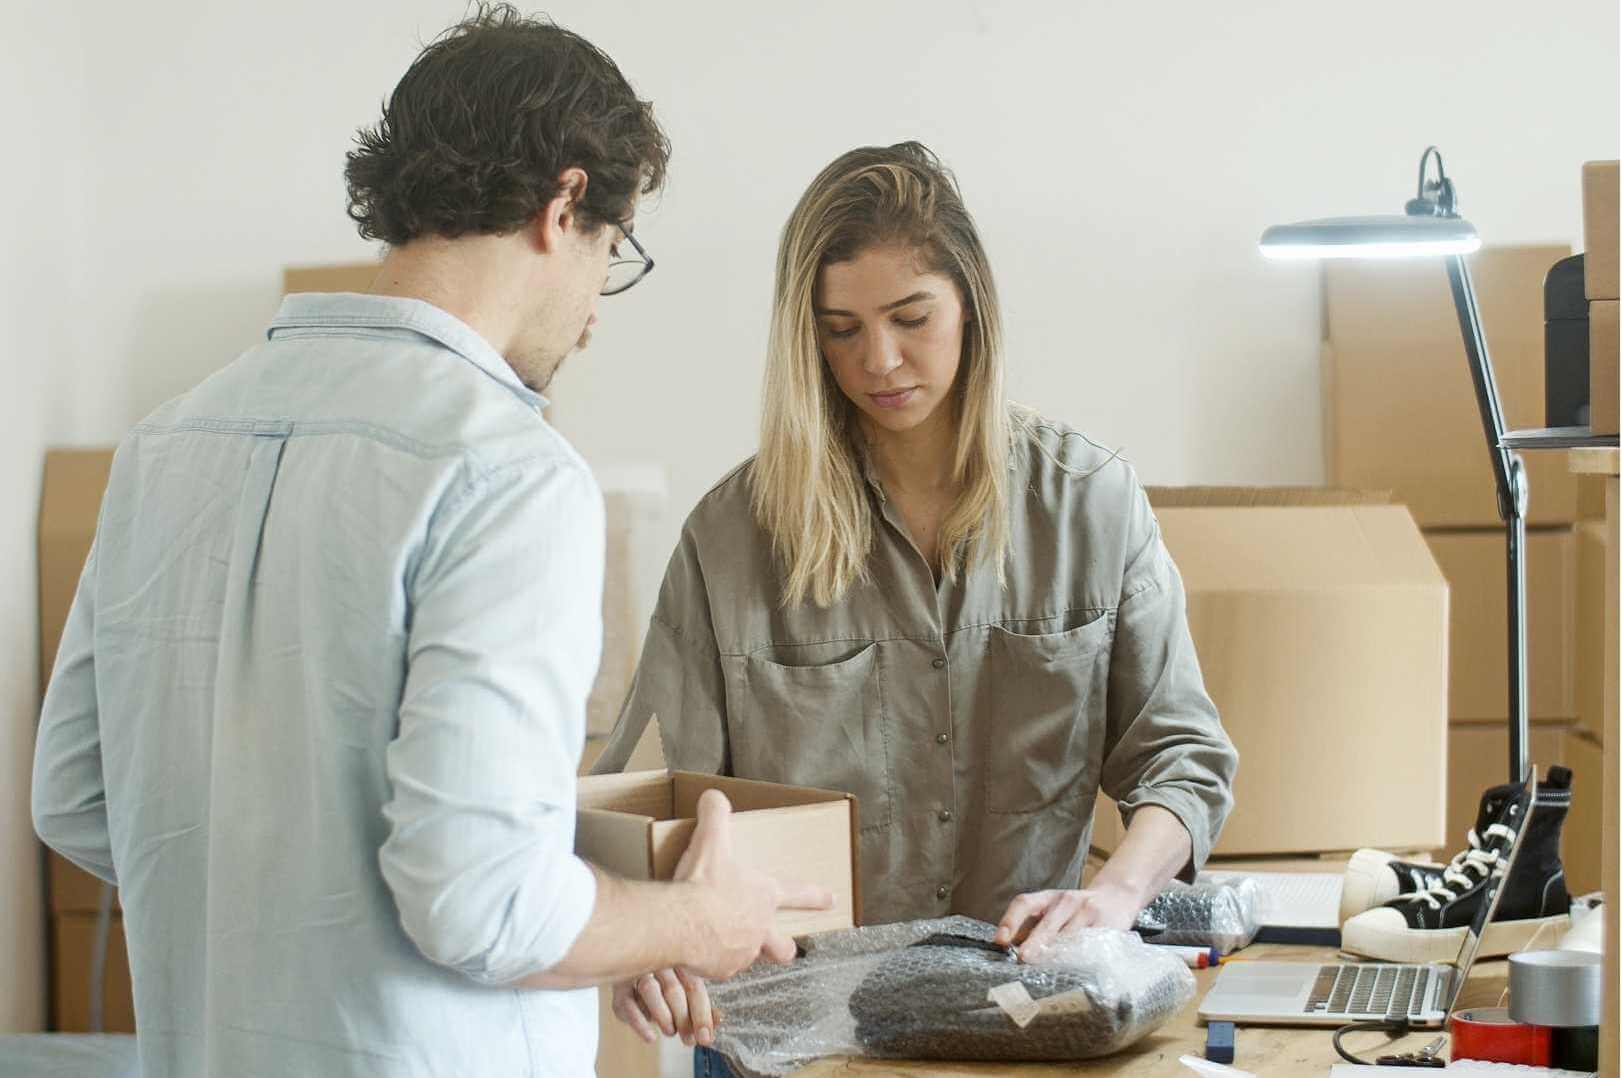 man helping woman with packaging